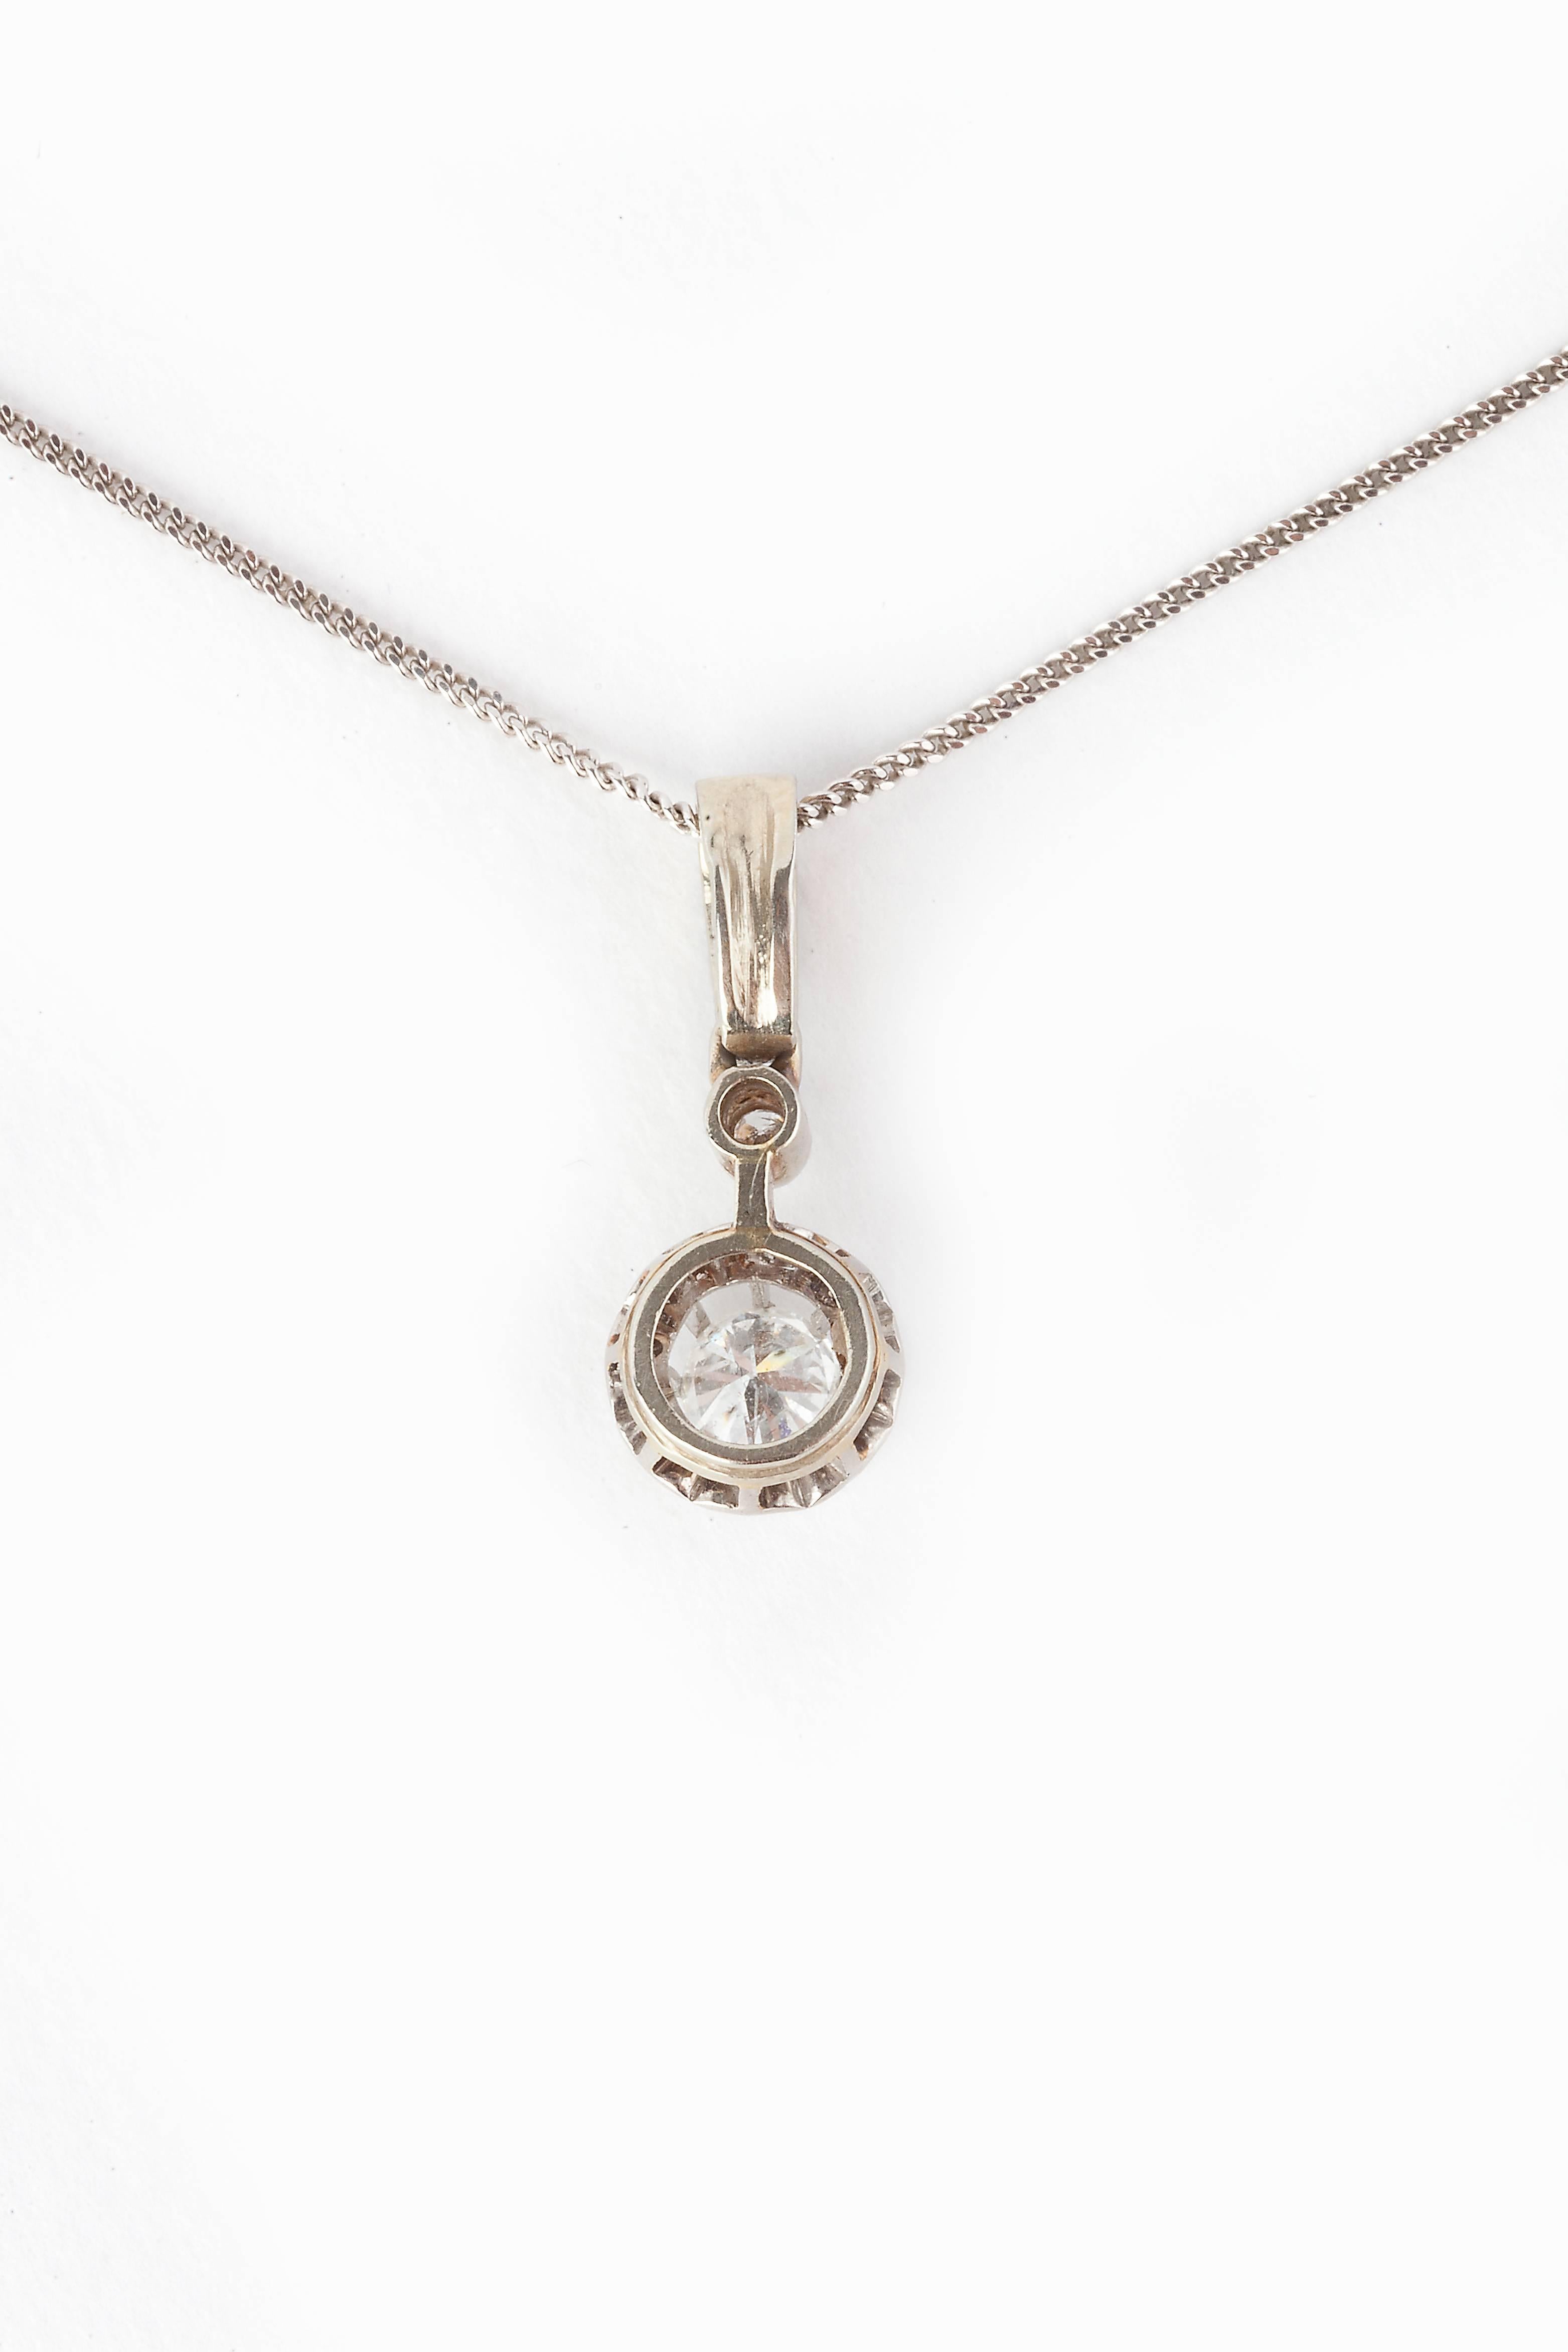 A diamond pendant, main stone 0.35cts, 0.5cts in total, VS1 colour E-F, set in platinum on an 18k gold chain, assay mark for France, Platinum on an 18k gold chain.